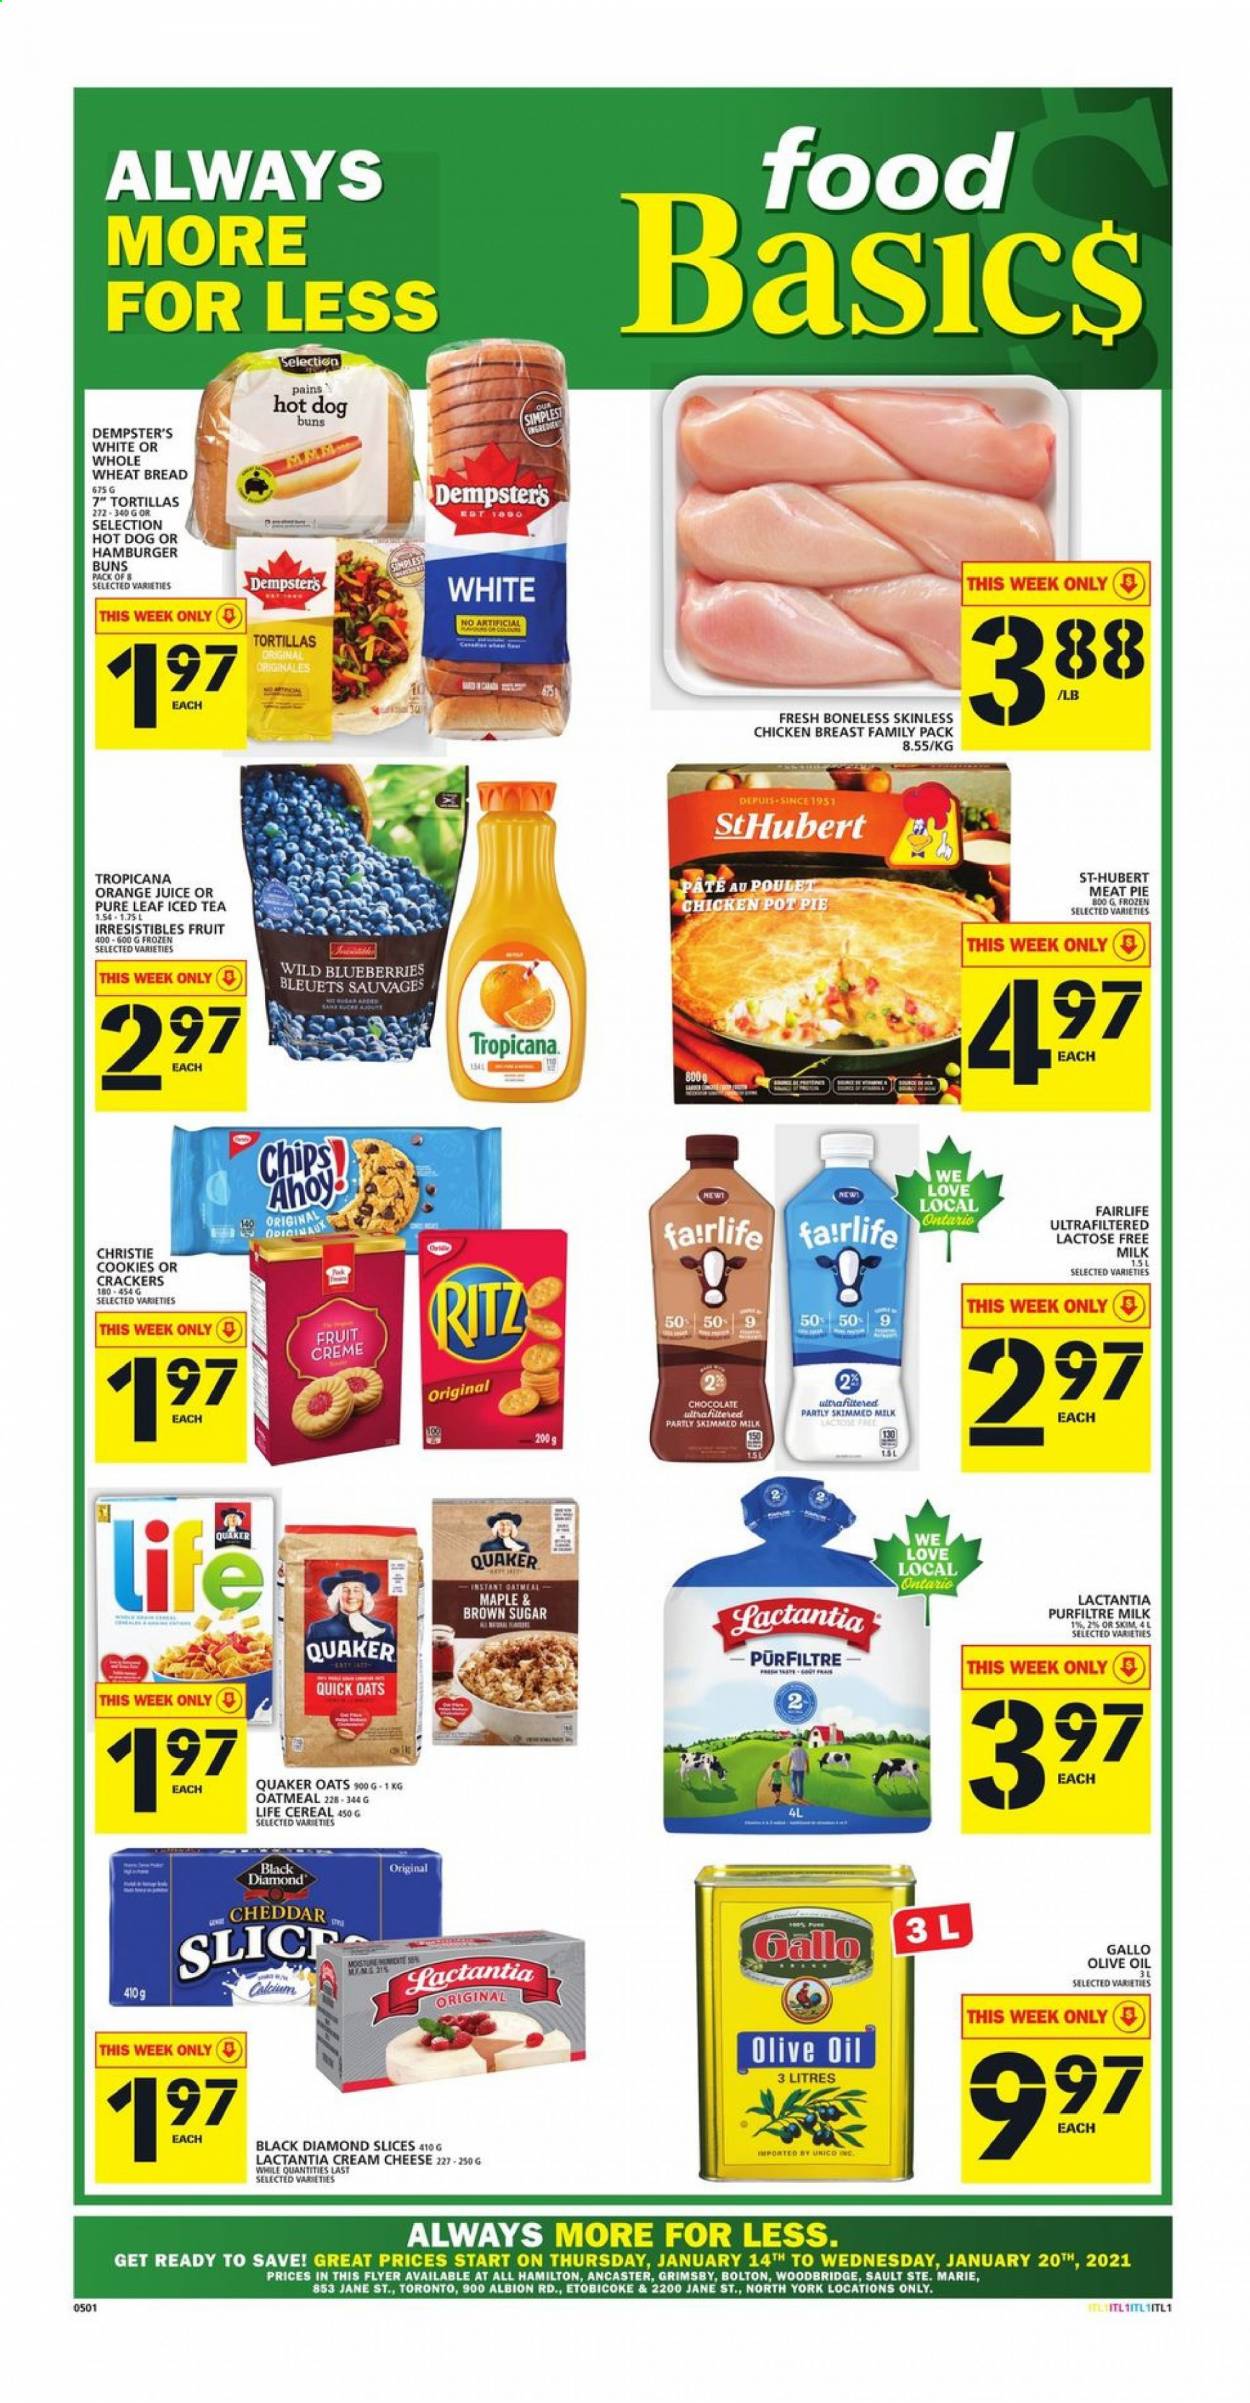 thumbnail - Food Basics Flyer - January 14, 2021 - January 20, 2021 - Sales products - tortillas, wheat bread, pie, buns, burger buns, pot pie, blueberries, hot dog, Quaker, cream cheese, cheese, milk, lactose free milk, cookies, chocolate, crackers, RITZ, oatmeal, oats, cereals, Quick Oats, olive oil, oil, orange juice, juice, ice tea, Pure Leaf, Woodbridge, chicken breasts, chicken, pot. Page 1.